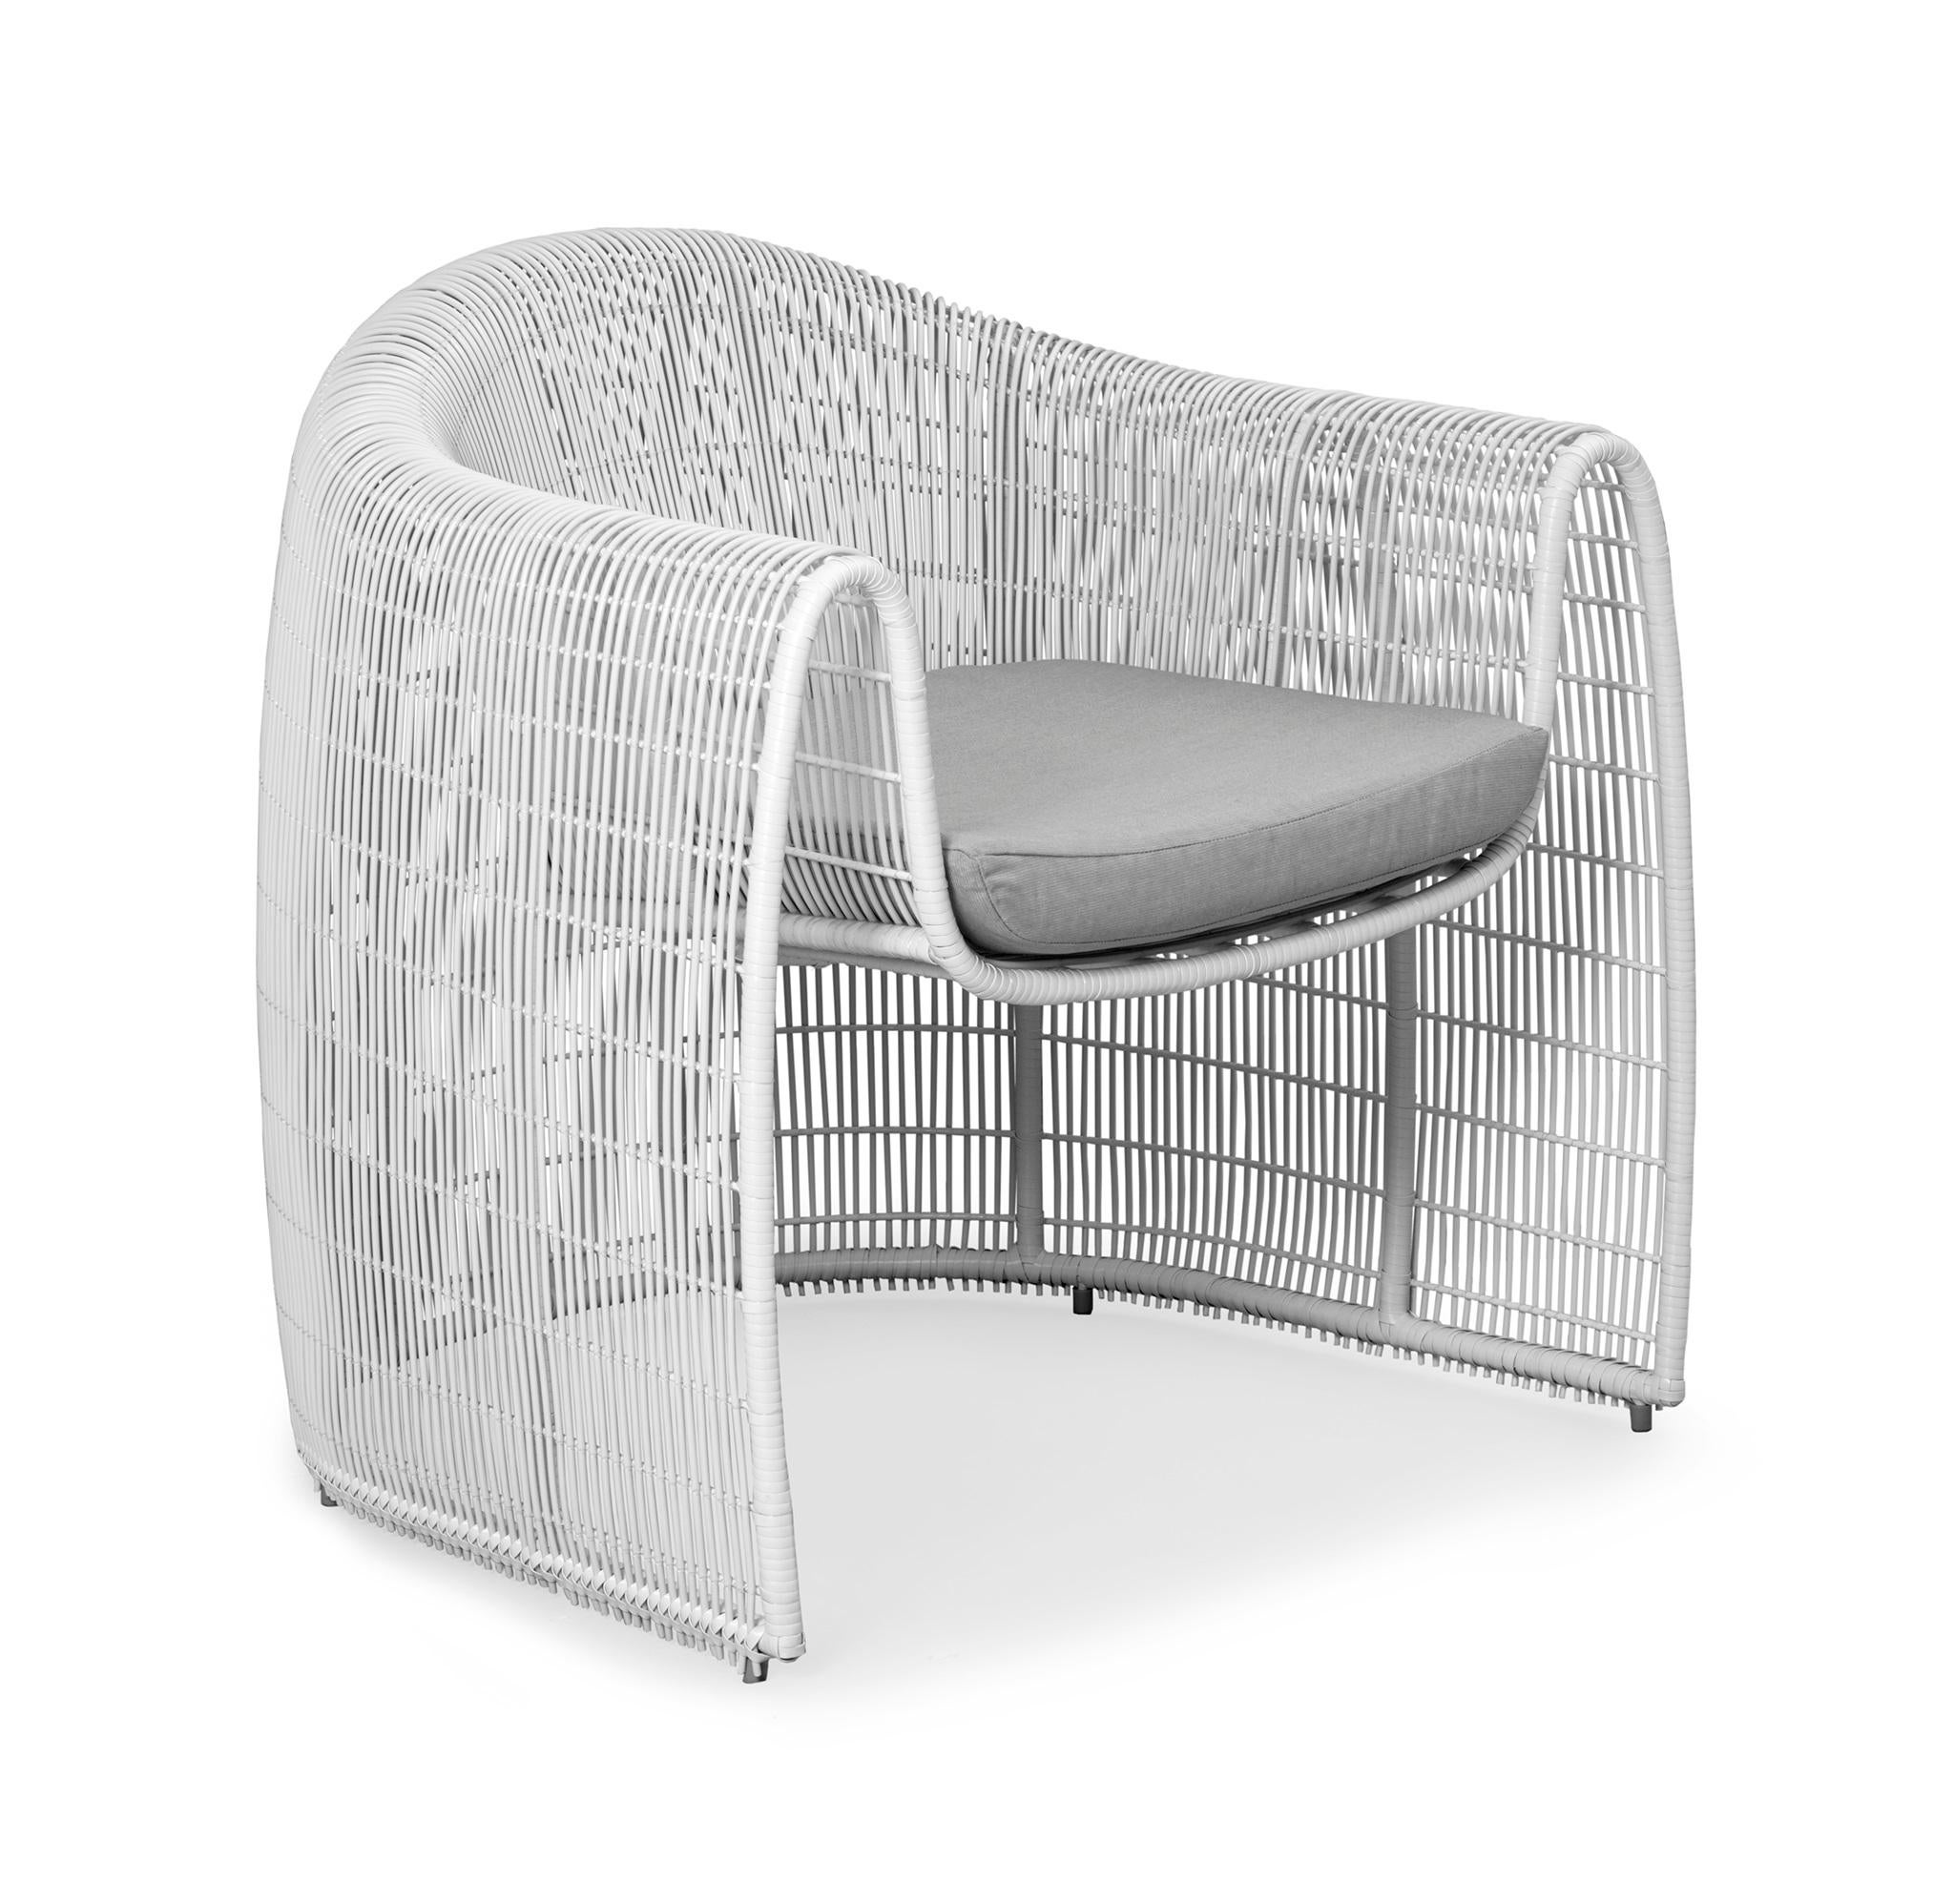 Outdoor Lulu club chair by Kenneth Cobonpue
Materials: polyethelene, steel. 
Also available in other colors and for indoors.
Dimensions: 78 cm x 84 cm x H 80.5 cm

Lulu adds grace to any space with its clean, nest-like silhouette. Its open